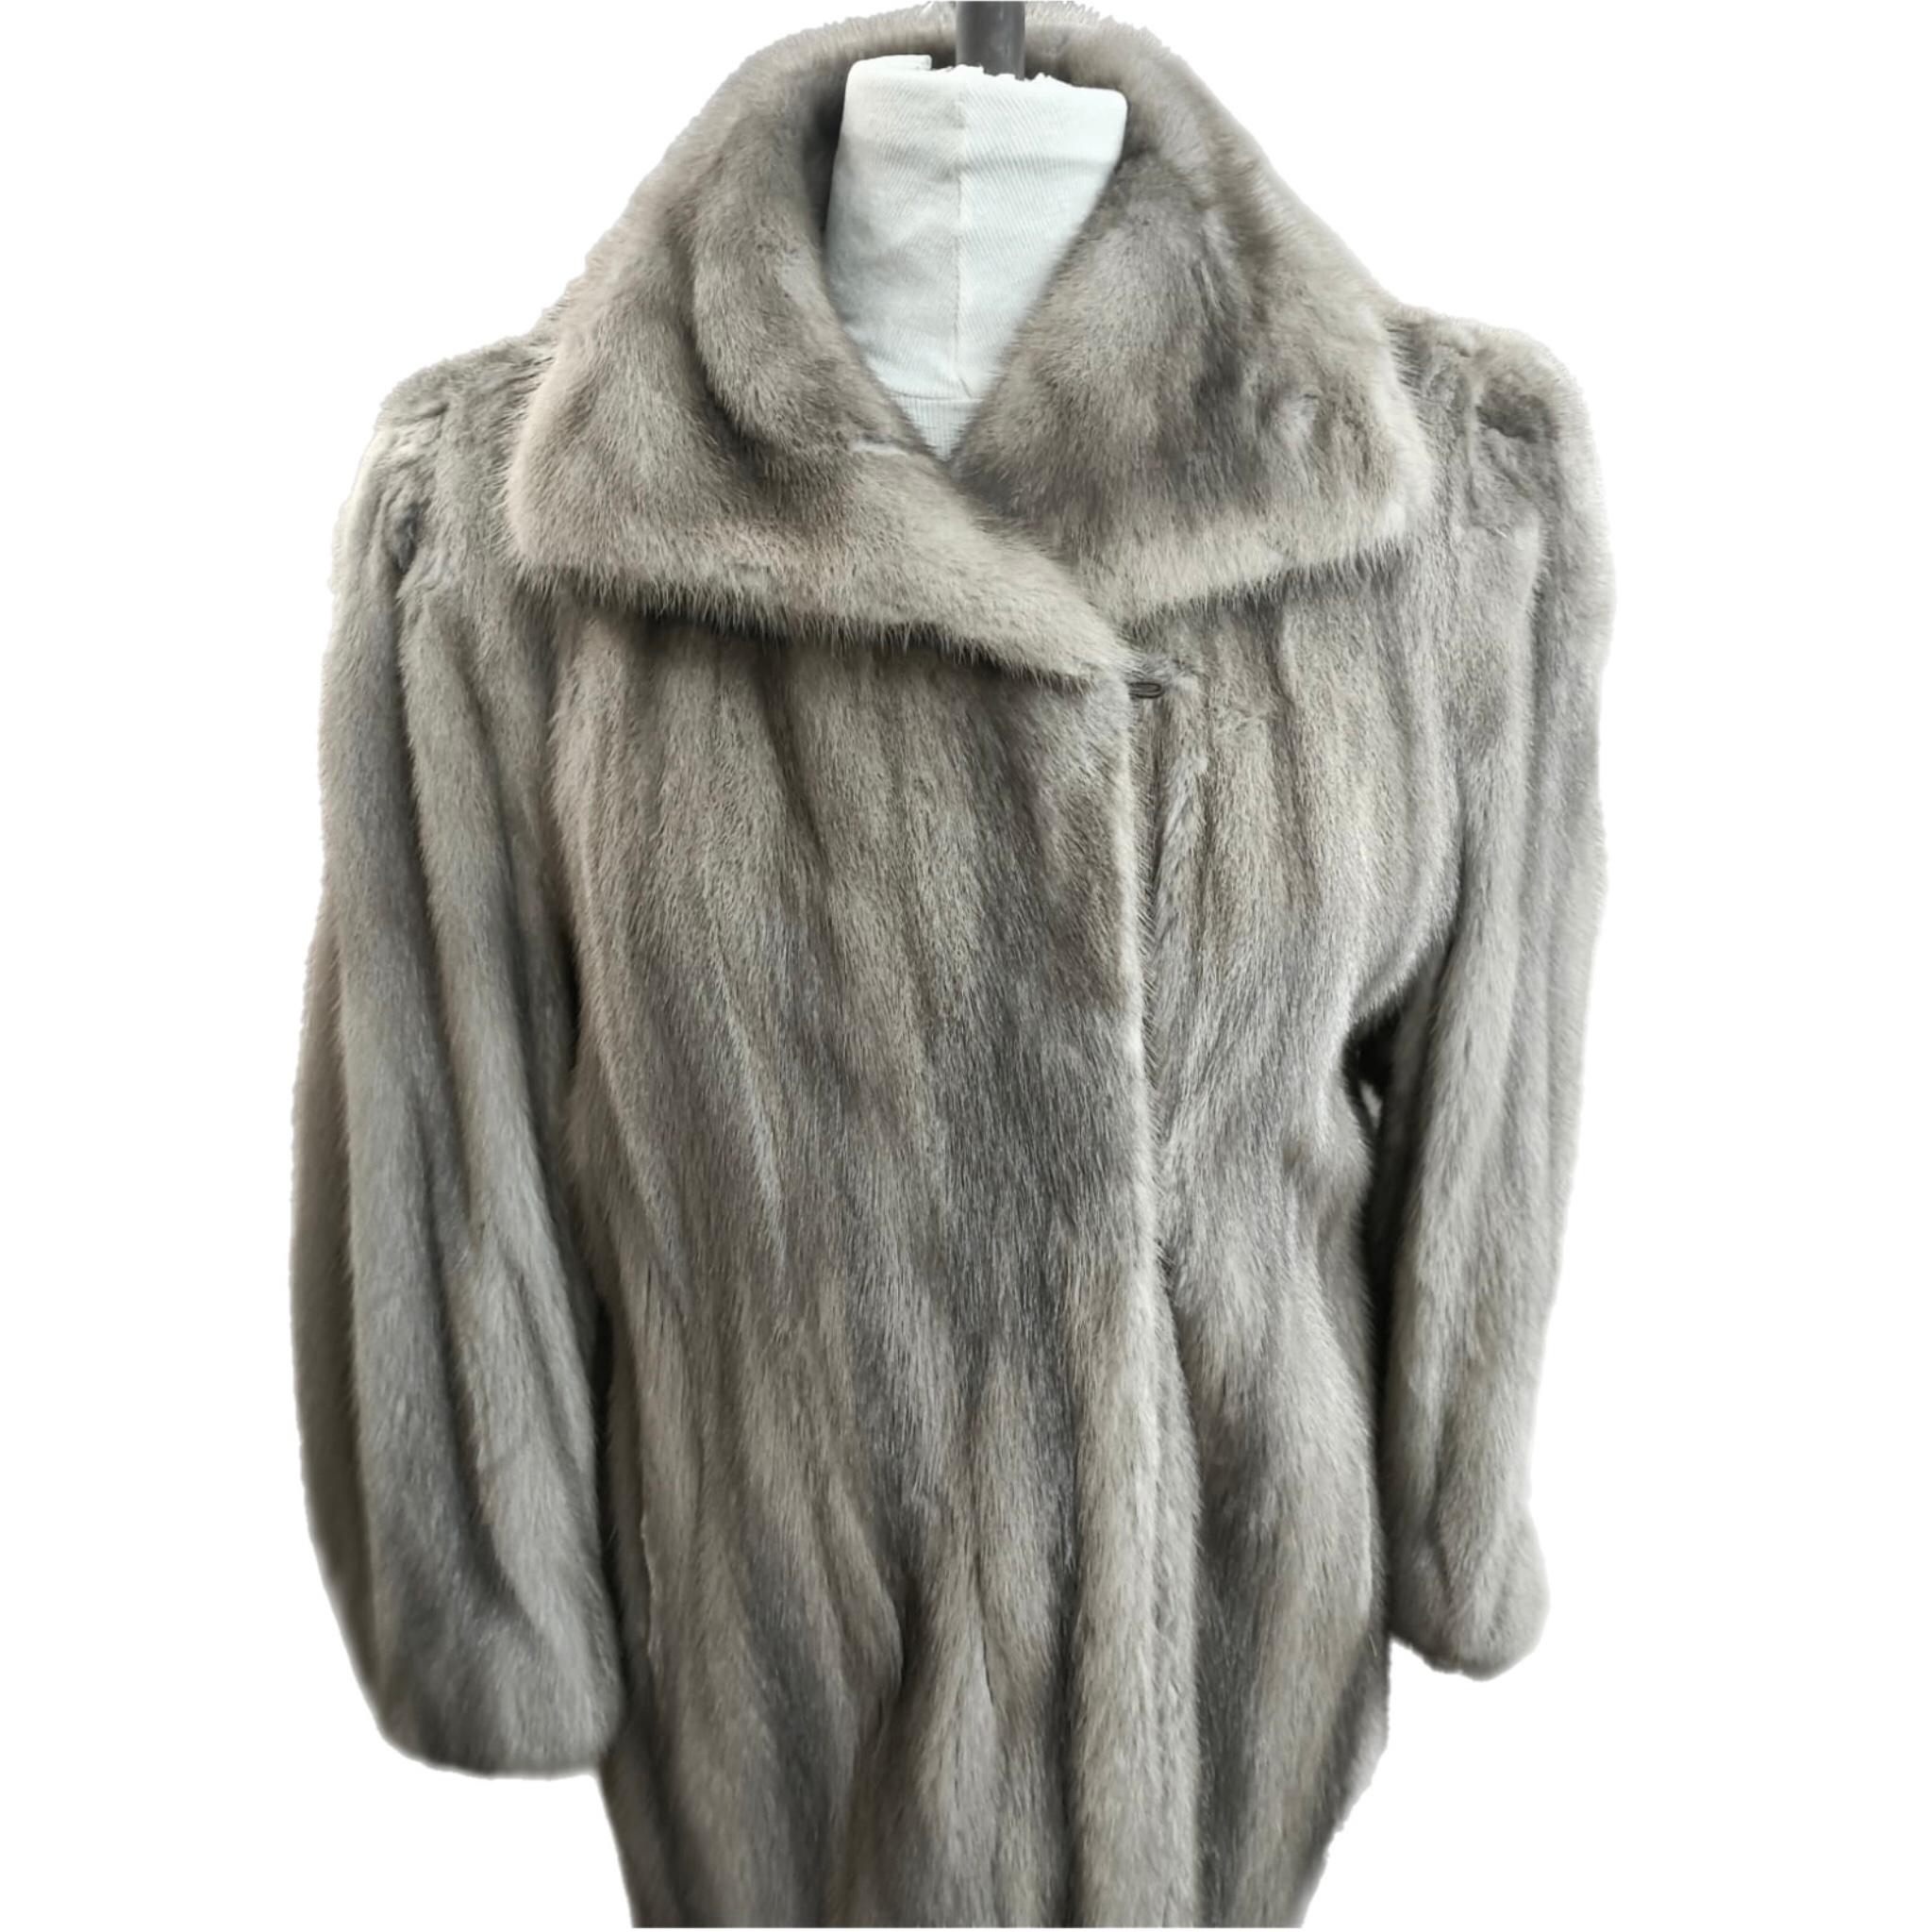 Sapphire Mink Fur Coat size 12 M In Excellent Condition For Sale In Montreal, Quebec